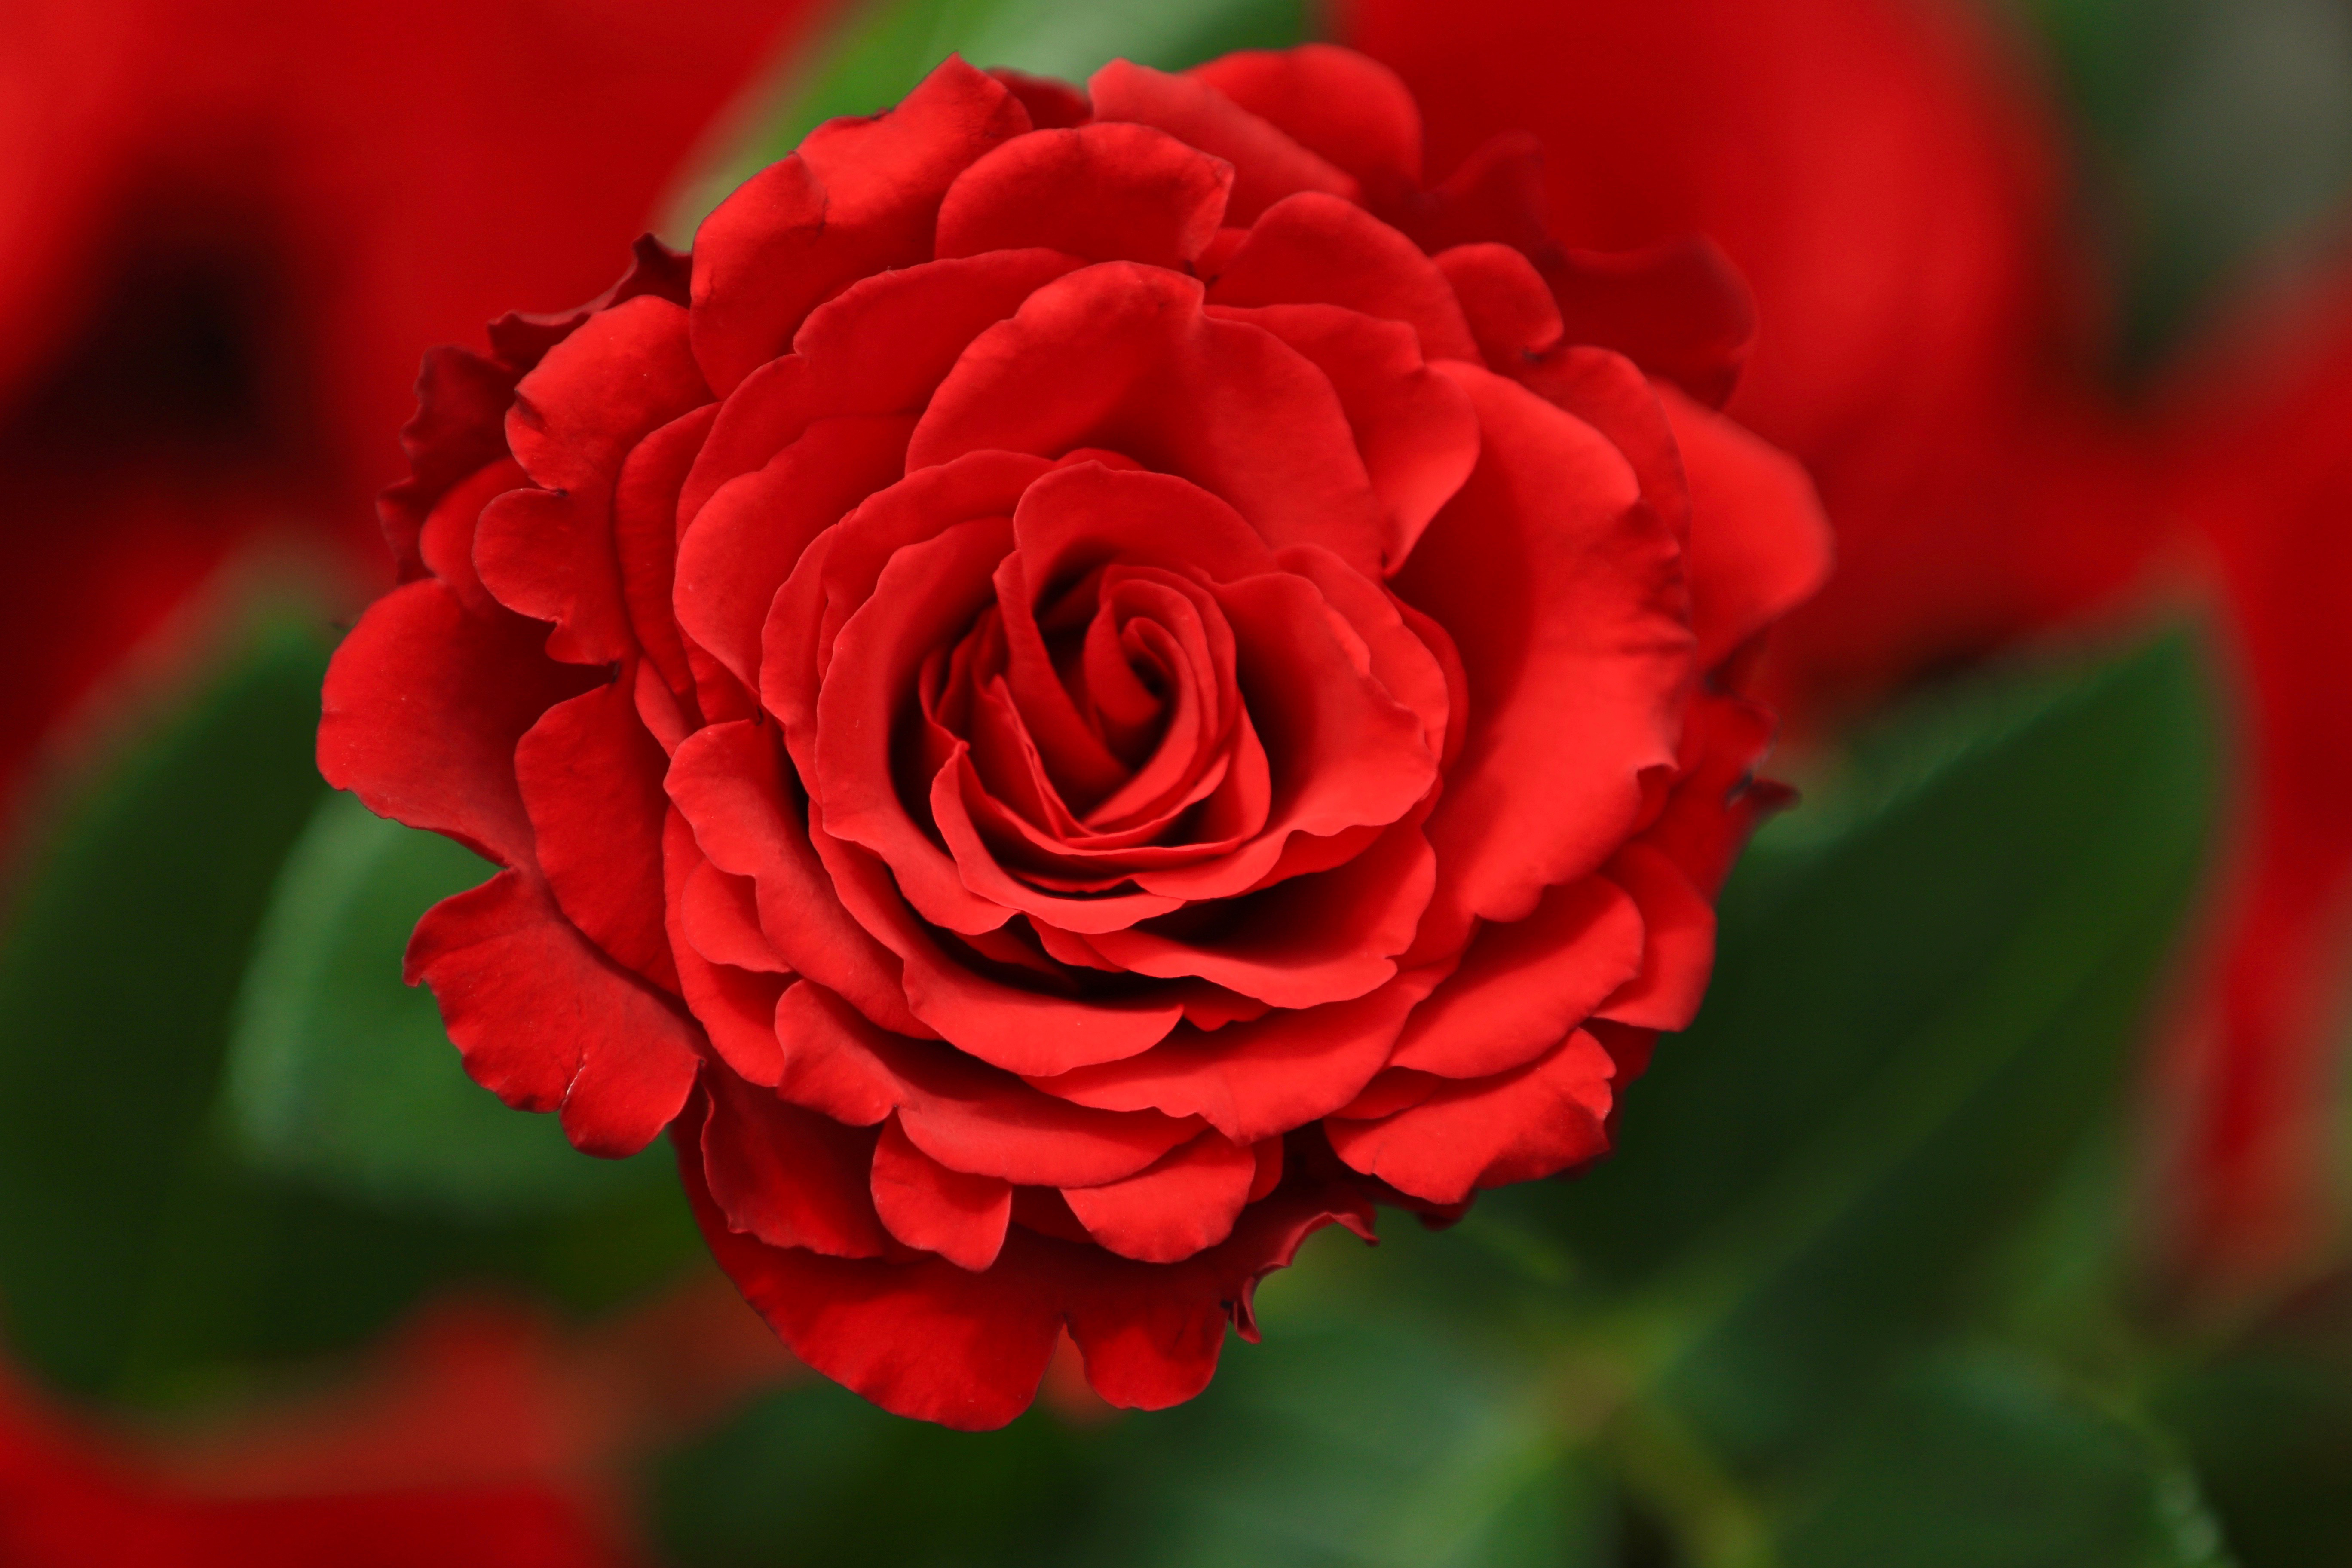 earth, rose, bud, close up, flower, nature, red flower, flowers cell phone wallpapers